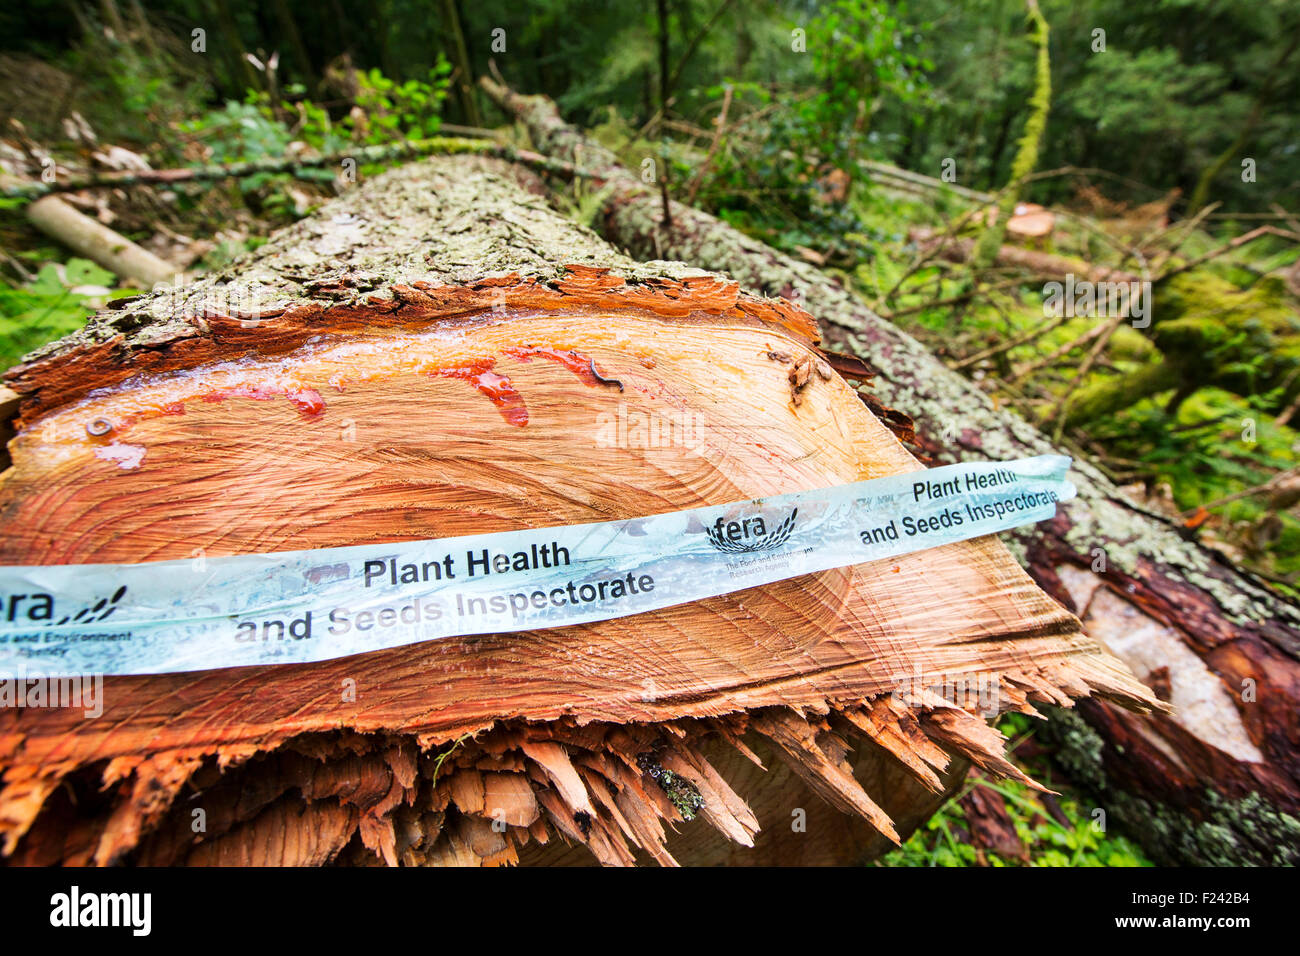 A woodland in Grasmere in the Lake District, UK, with Larch Trees infected by Phytophera Ramorum, a disease that infects Oaks and Larch Trees (Larix decidua). The Larch trees have been felled to try and contain the spread of the disease. Stock Photo